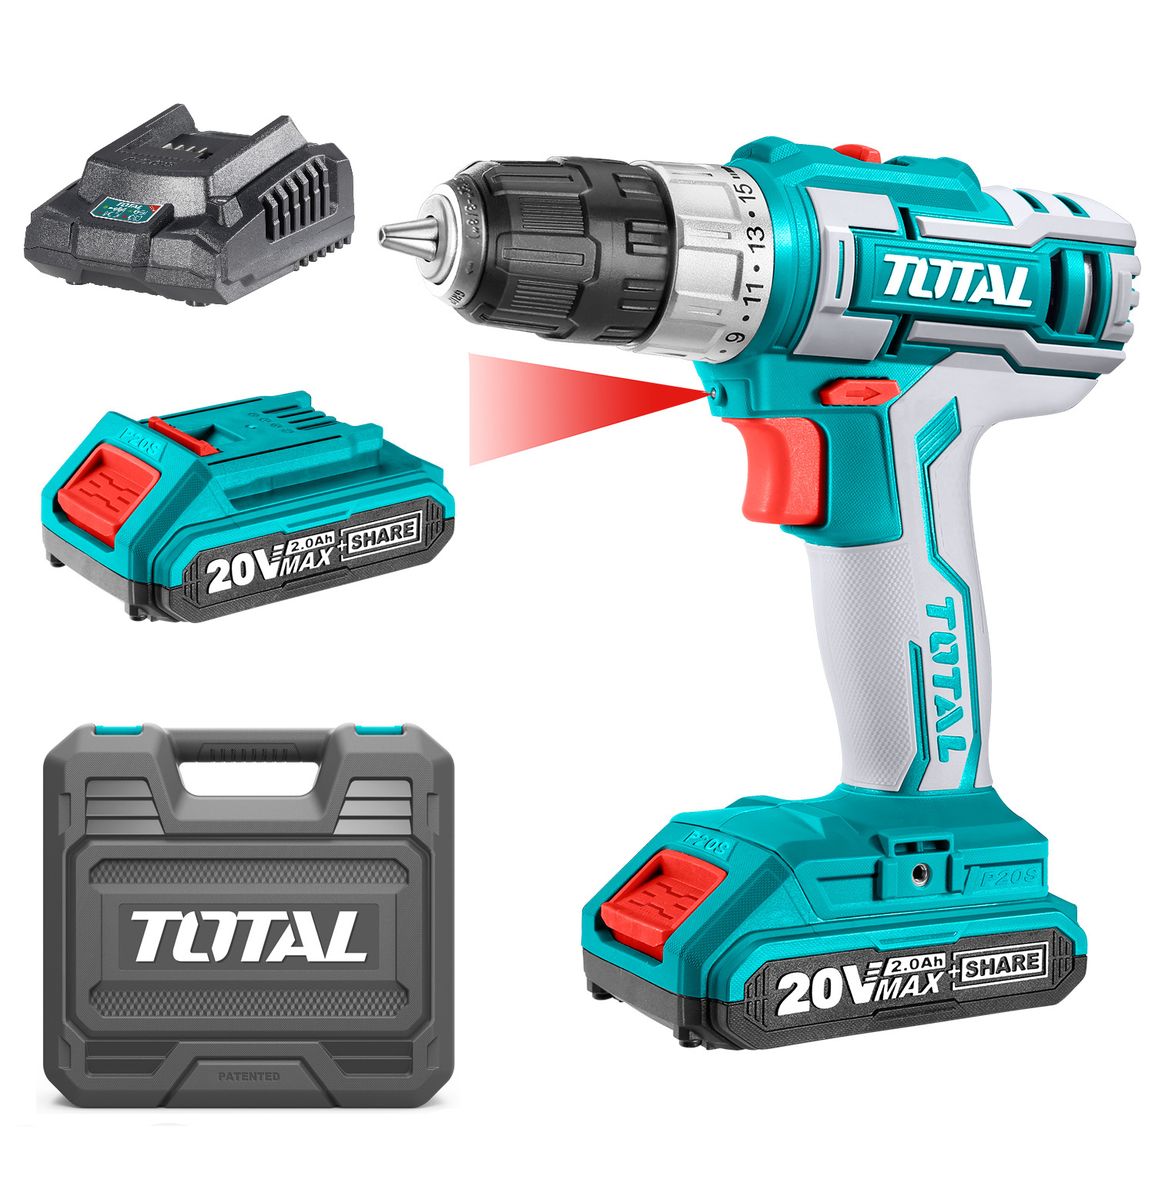 Total Tools 20V Lithium-Ion Impact Cordless Drill with 2 x Batt and Charger